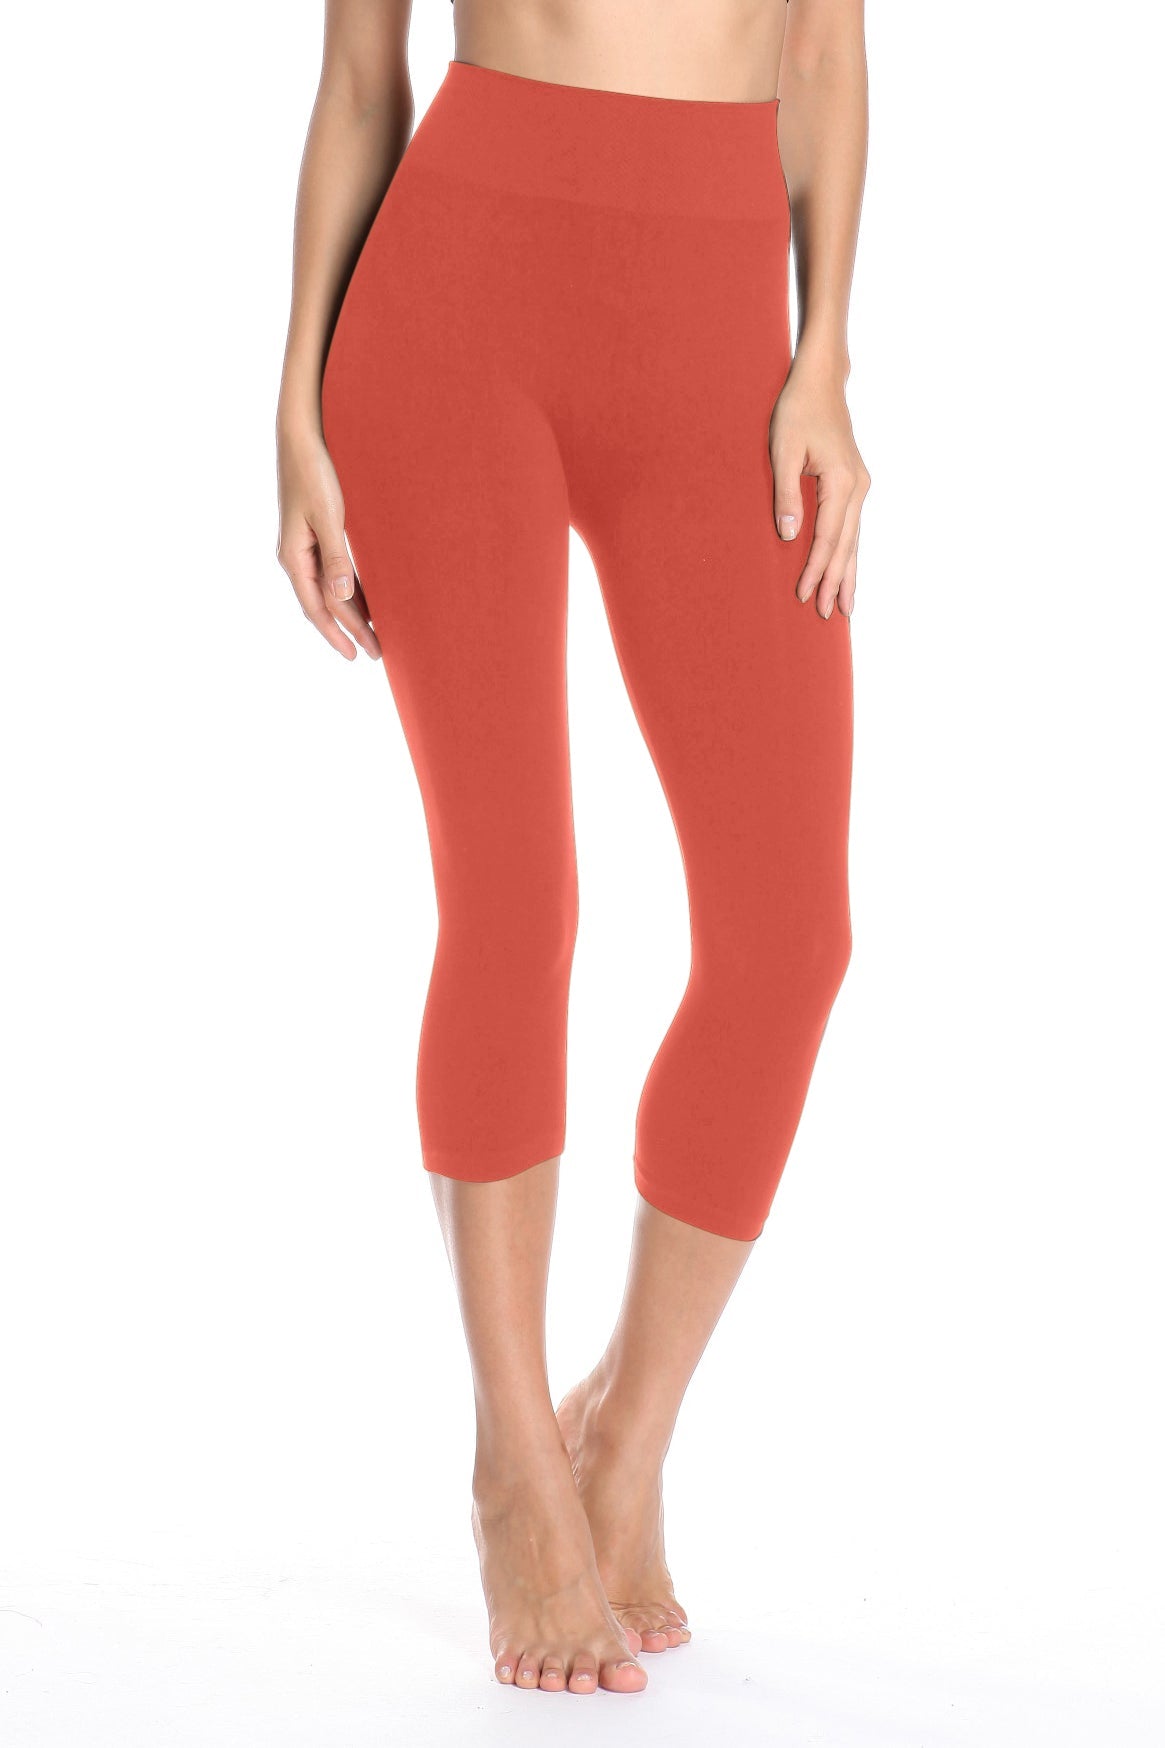 Capri Leggings in Bamboo/cotton/spandex Jersey With 4 Way Stretch. -   Canada